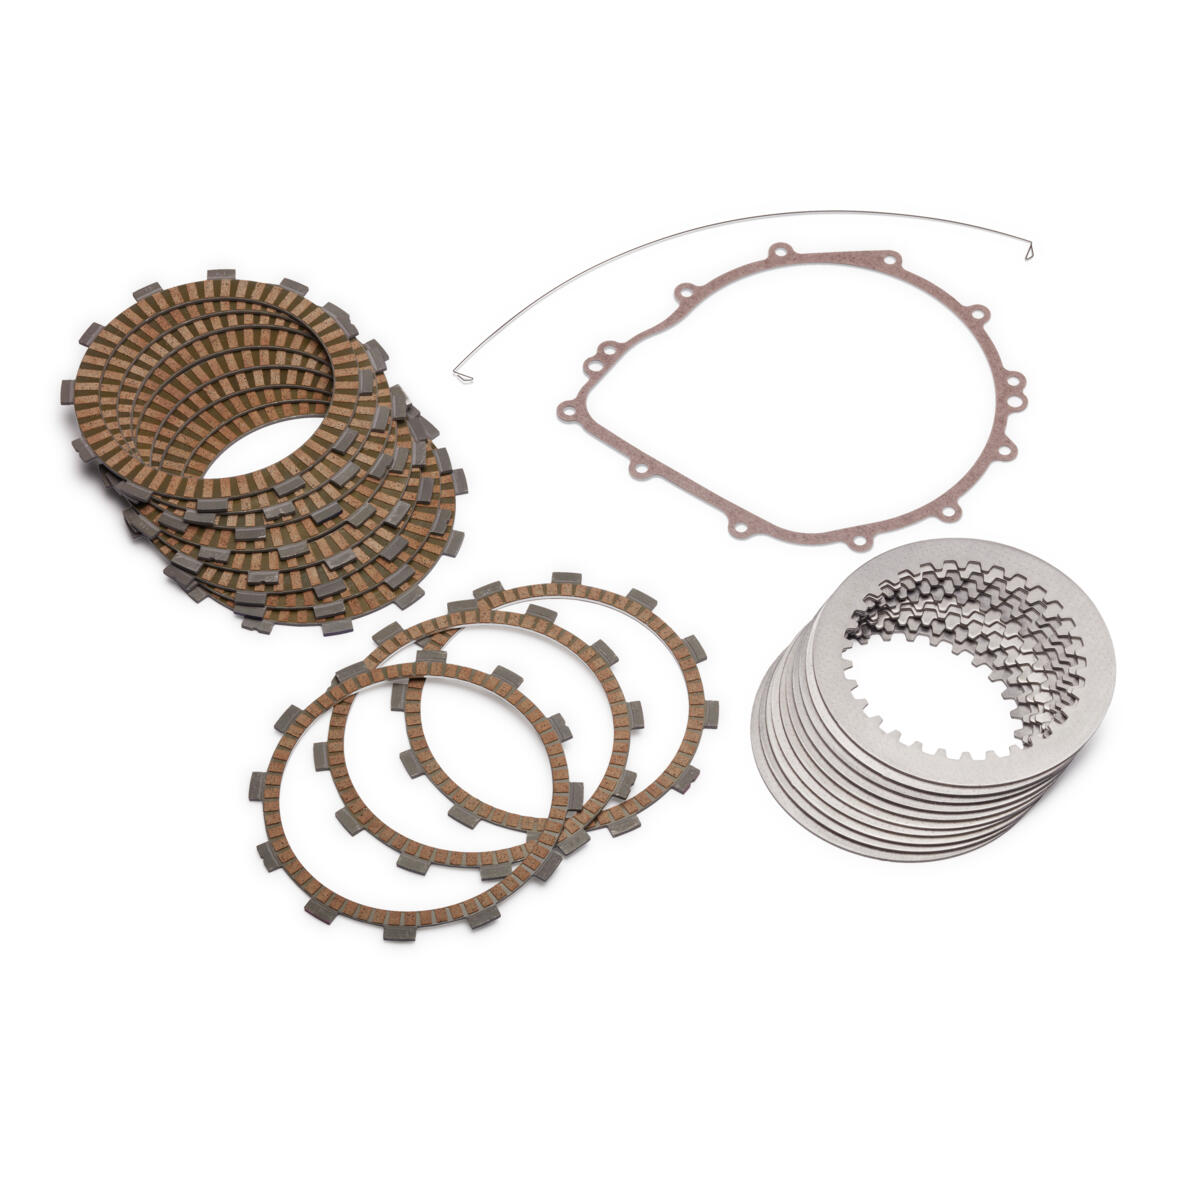 This complete clutch kit includes all the OEM plates and gaskets needed to replace the wear items in the YXZ1000R's clutch